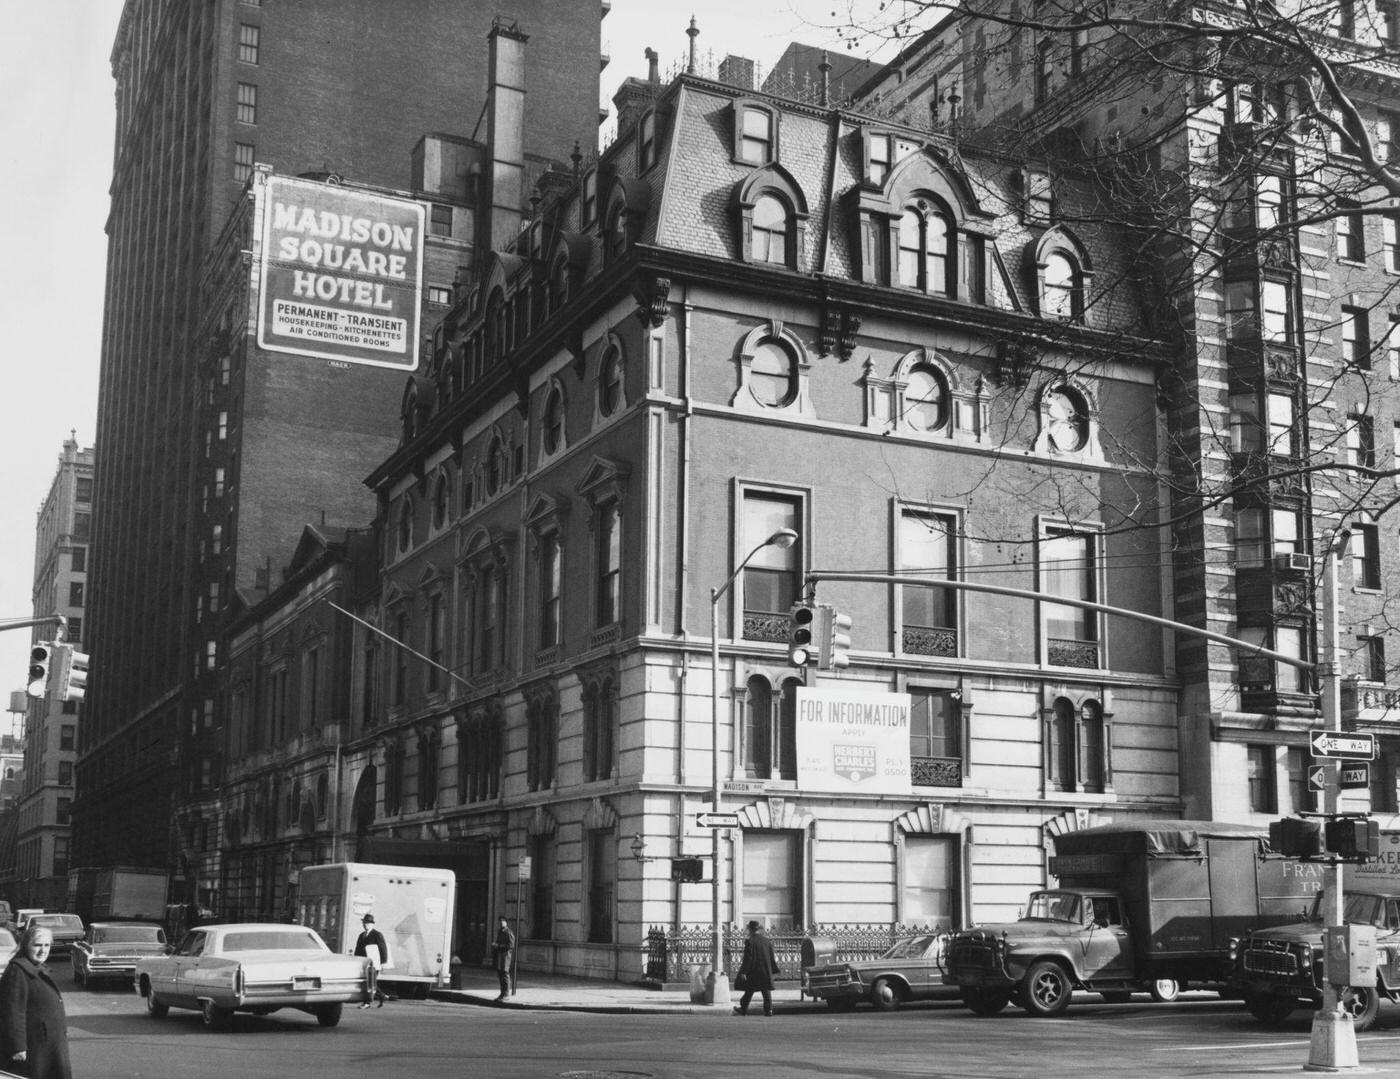 Jerome Mansion With A 'Herbert Charles' Real Estate Board, Due For Demolition, Once Home Of Financier Leonard Jerome, Father Of Jennie Jerome, Mother Of Winston Churchill, Manhattan, 1967